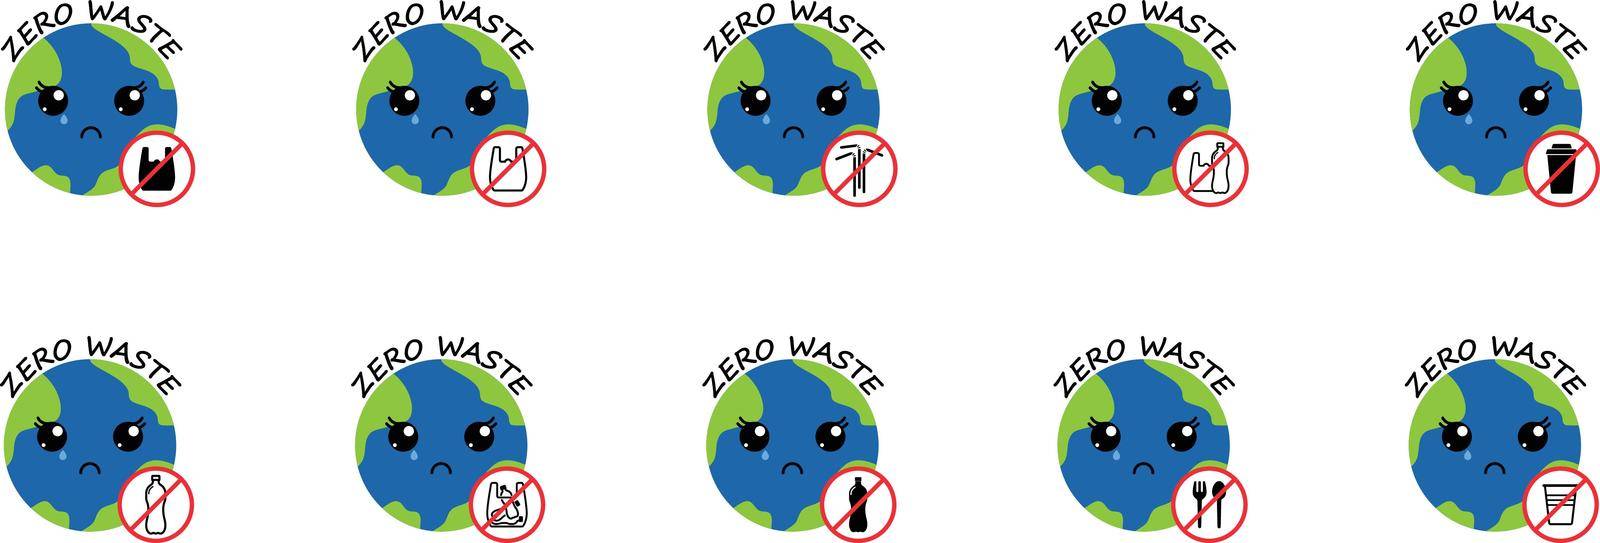 crying mother planet earth with cute kawaii black eyes, red prohibition sign and lettering. zero waste. go green eco friendly environment concept. save environment and ecology of earth.